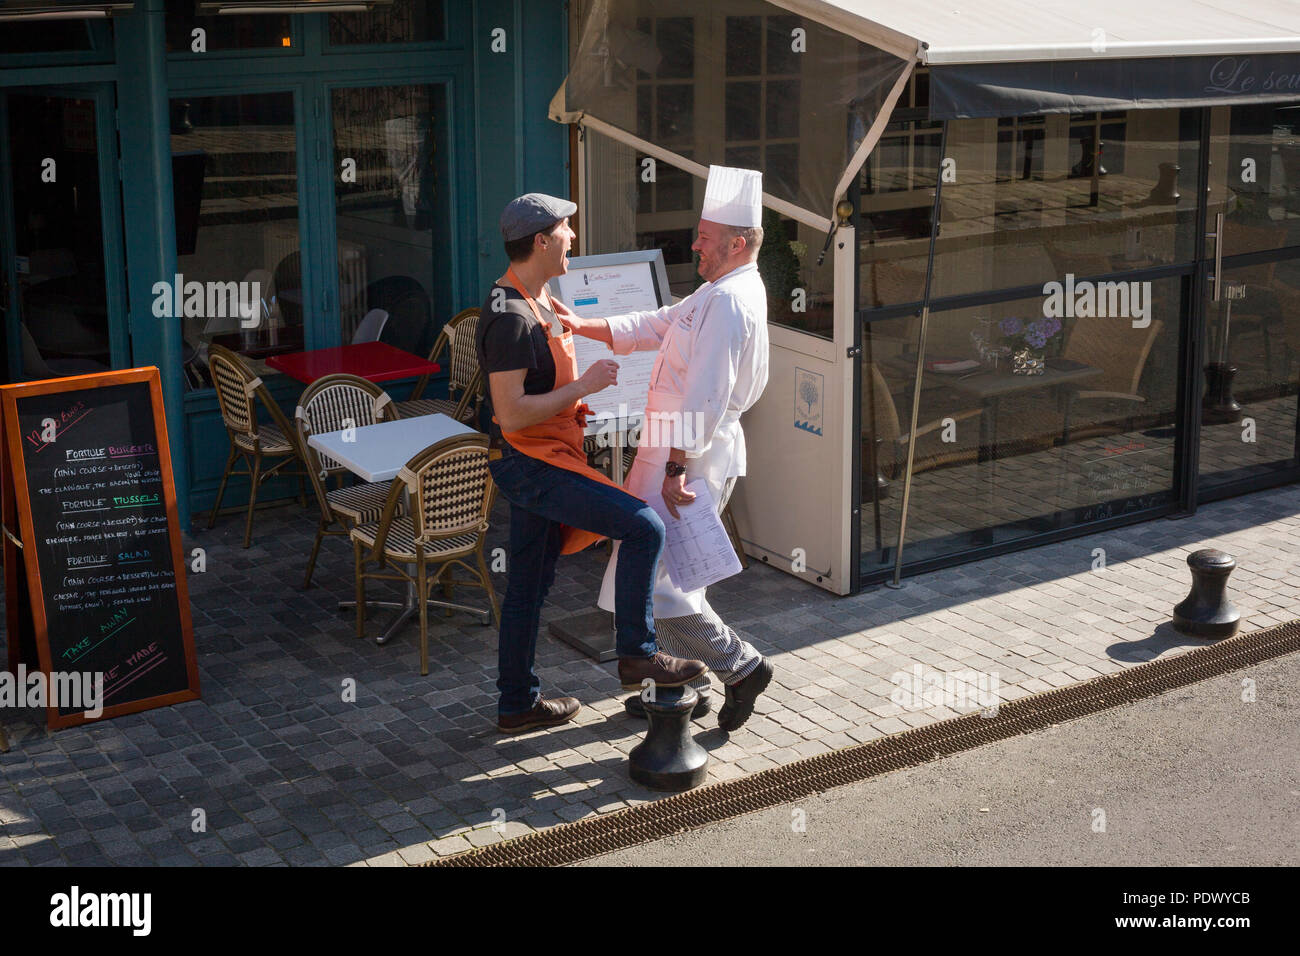 A chef enjoys a joke with a friend in a street scene in Honfleur, Normandy, France Stock Photo